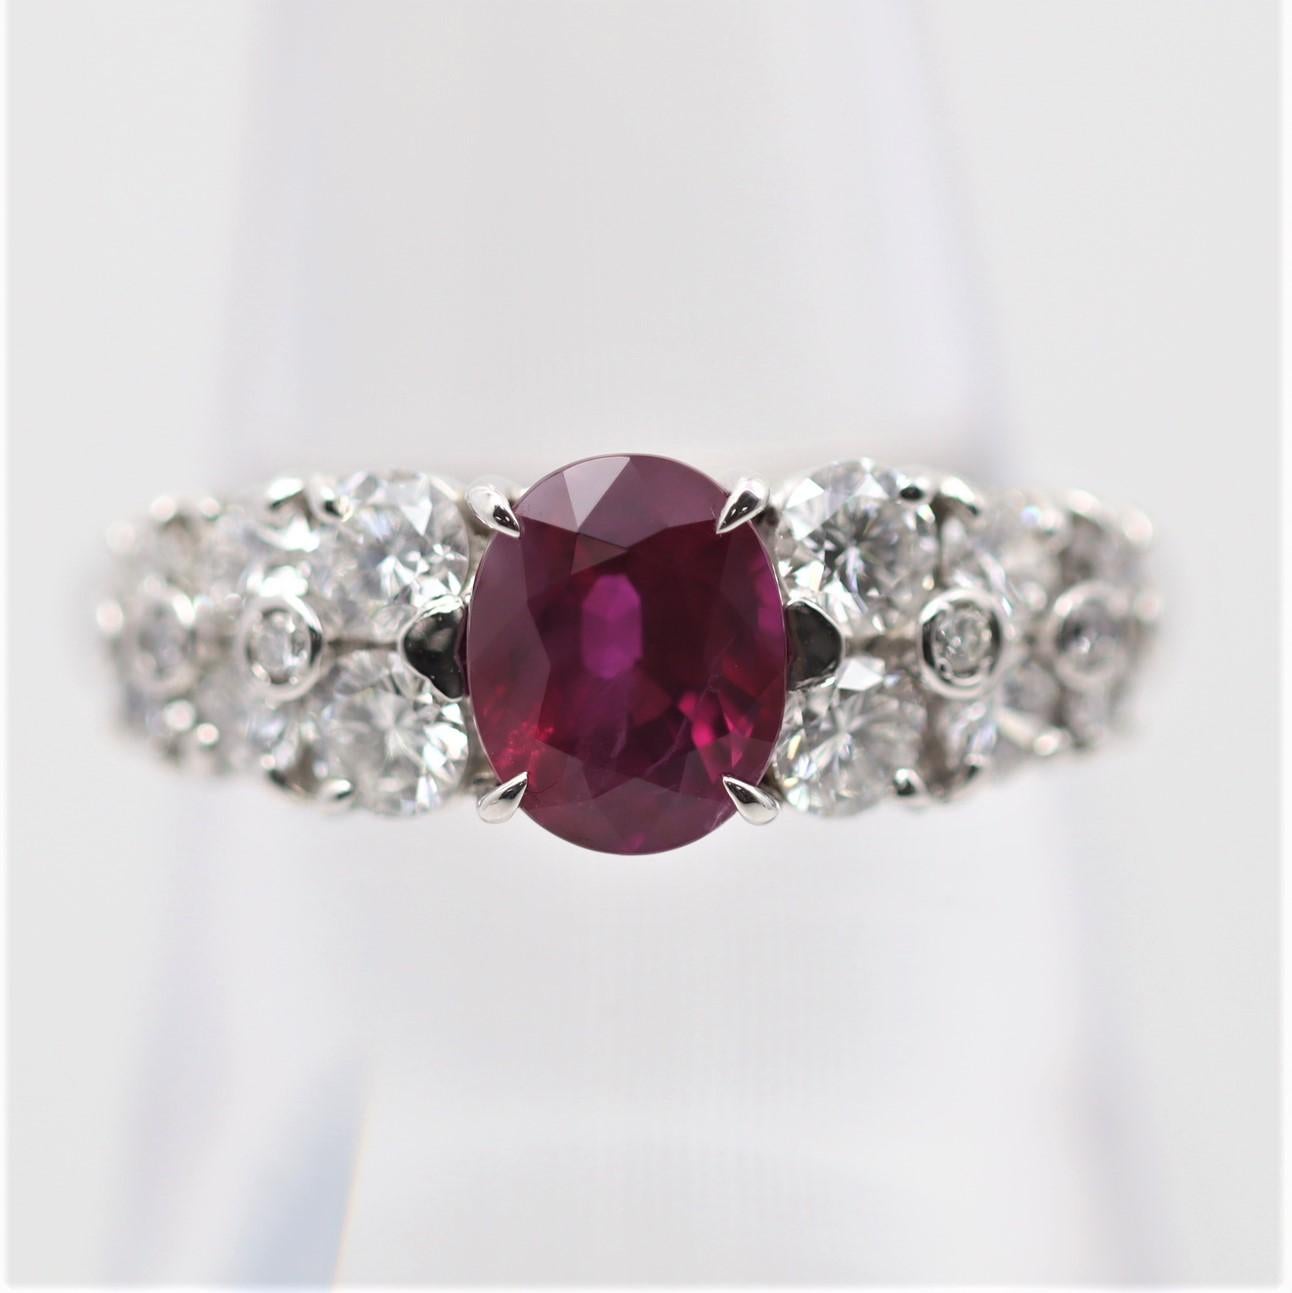 A fabulous 1.81 carat Burmese ruby takes center stage of this platinum ring. It has a fine vivid red color, allowing the laboratory to type it as “pigeons blood” color, a term used for the finest color rubies in the trade. It is complemented by 1.00